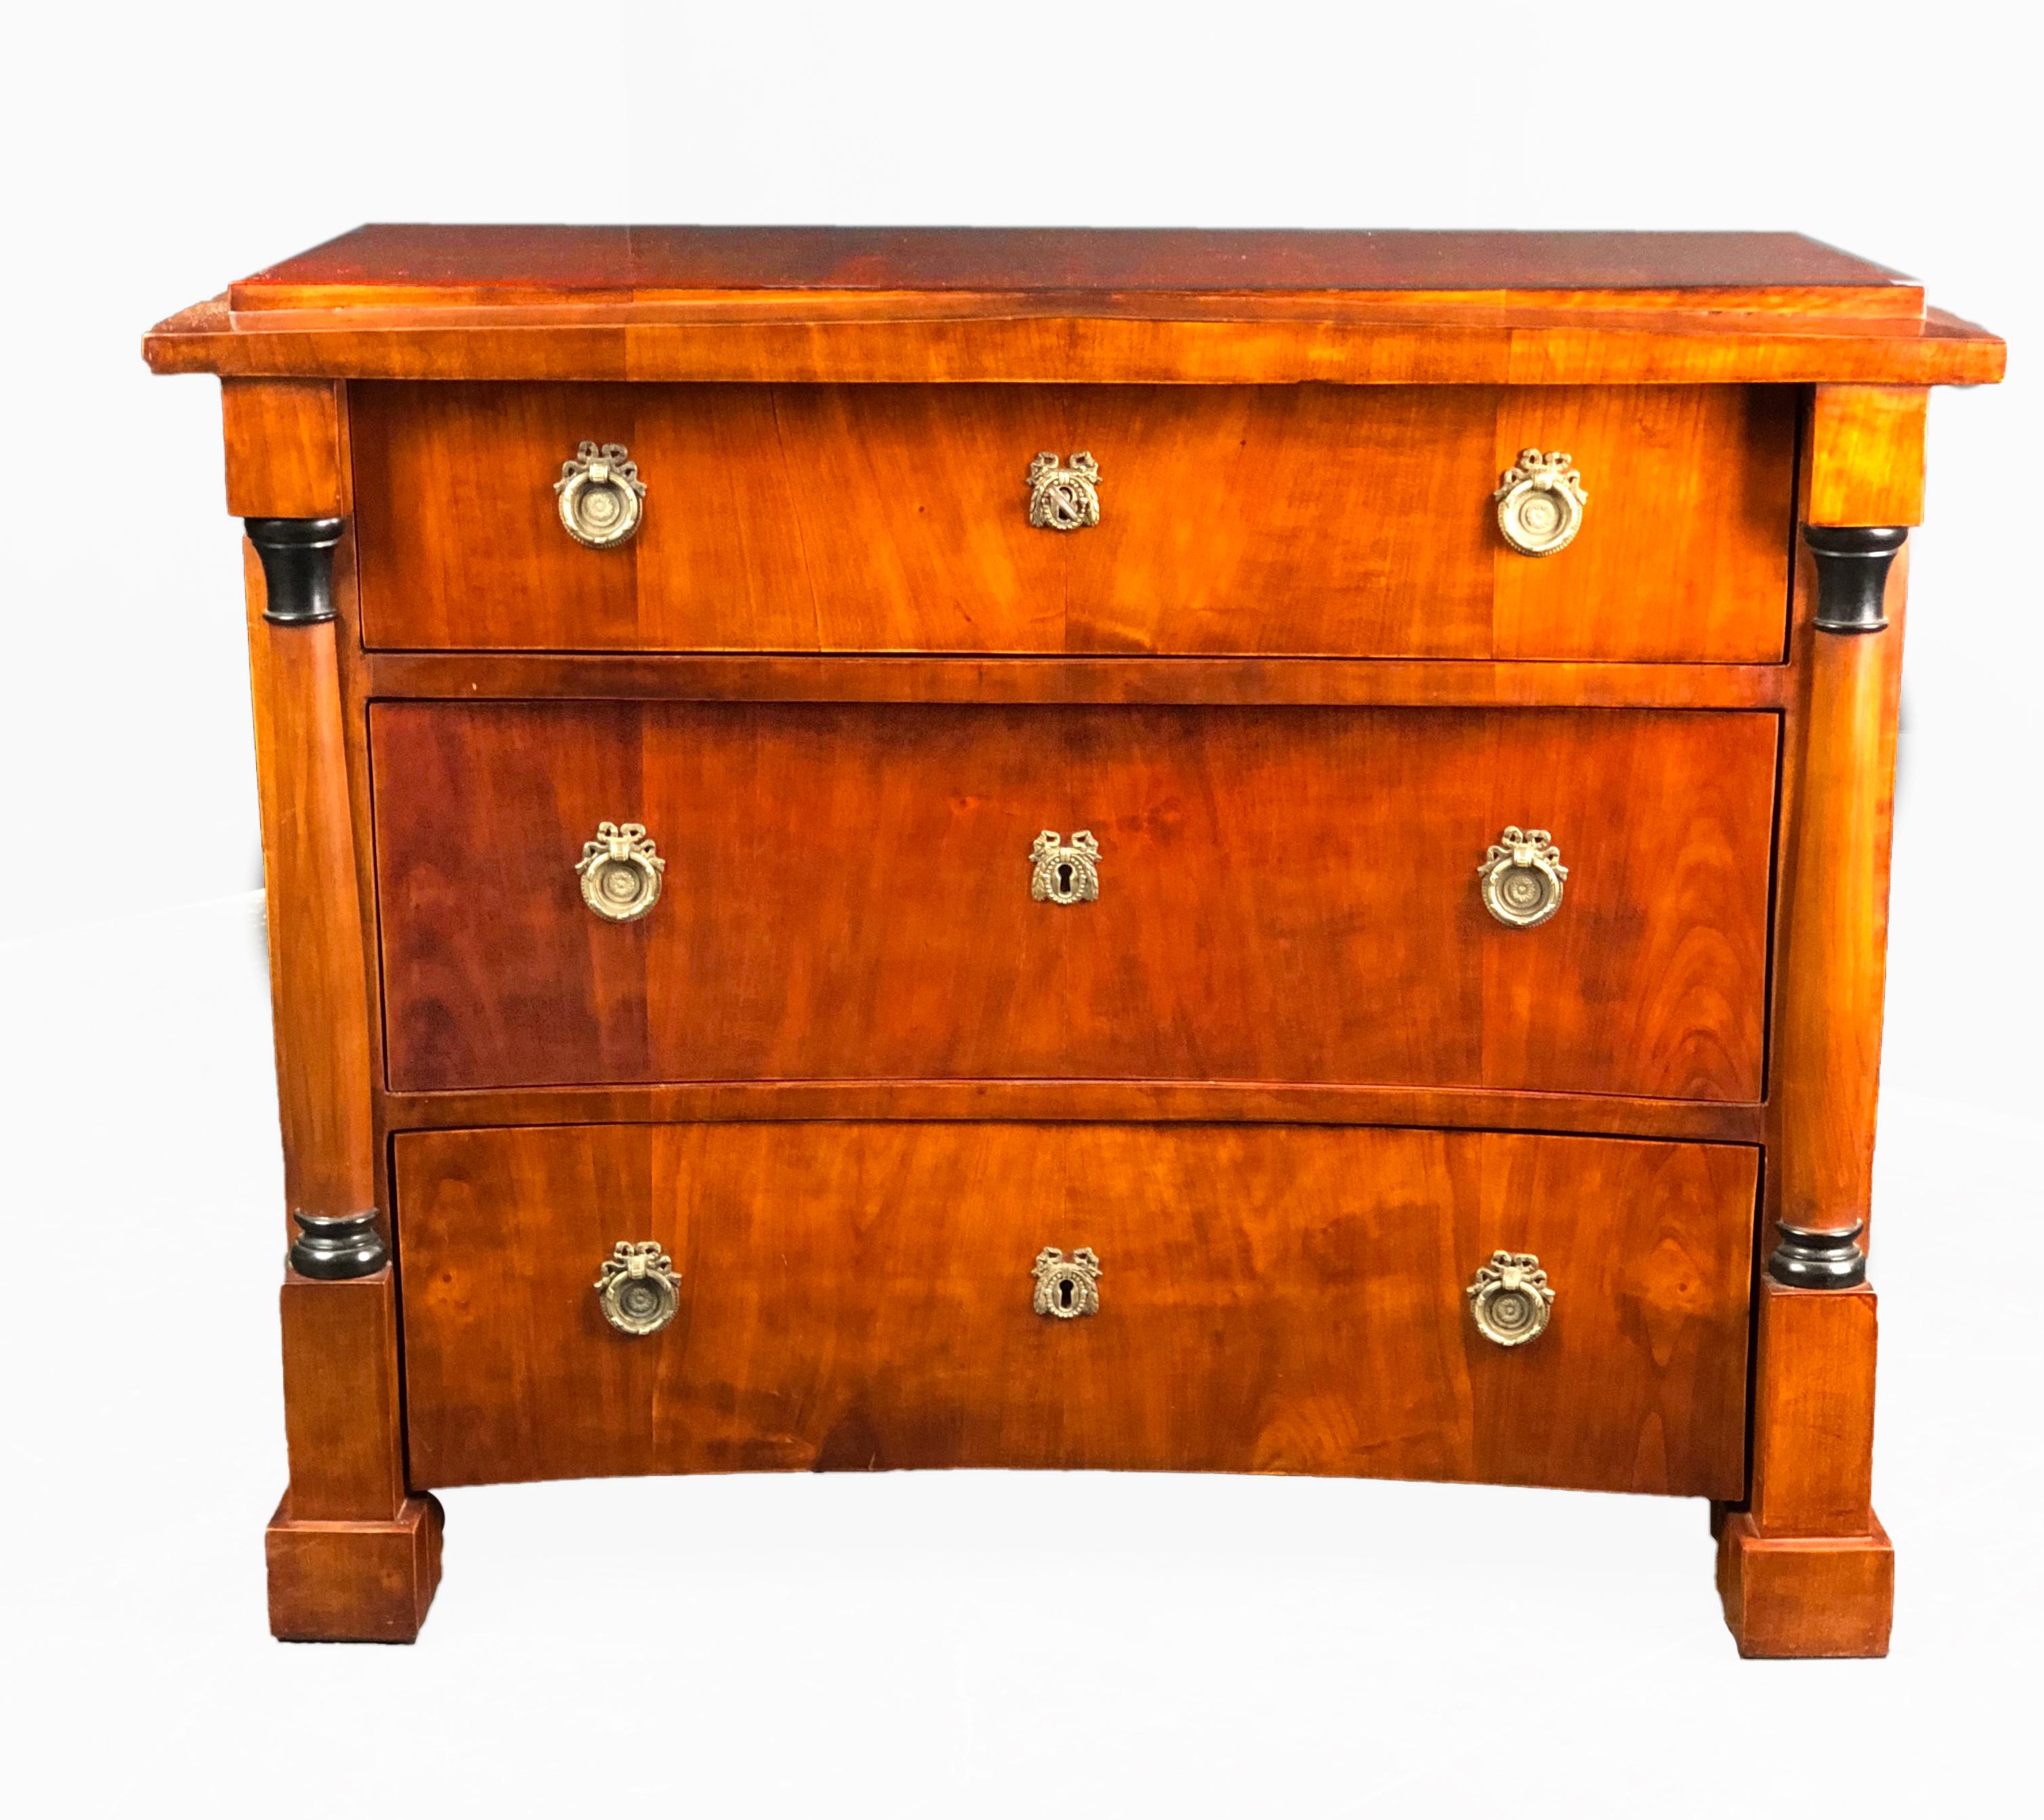 Outstanding and rare Biedermeier cherrywood commode with 3 drawers dating to early 19th century Germany. The architectural shape features a Schinkel style pediment and 3 drawers, the lower 2 of concave shape, a quite unusual feature; they are